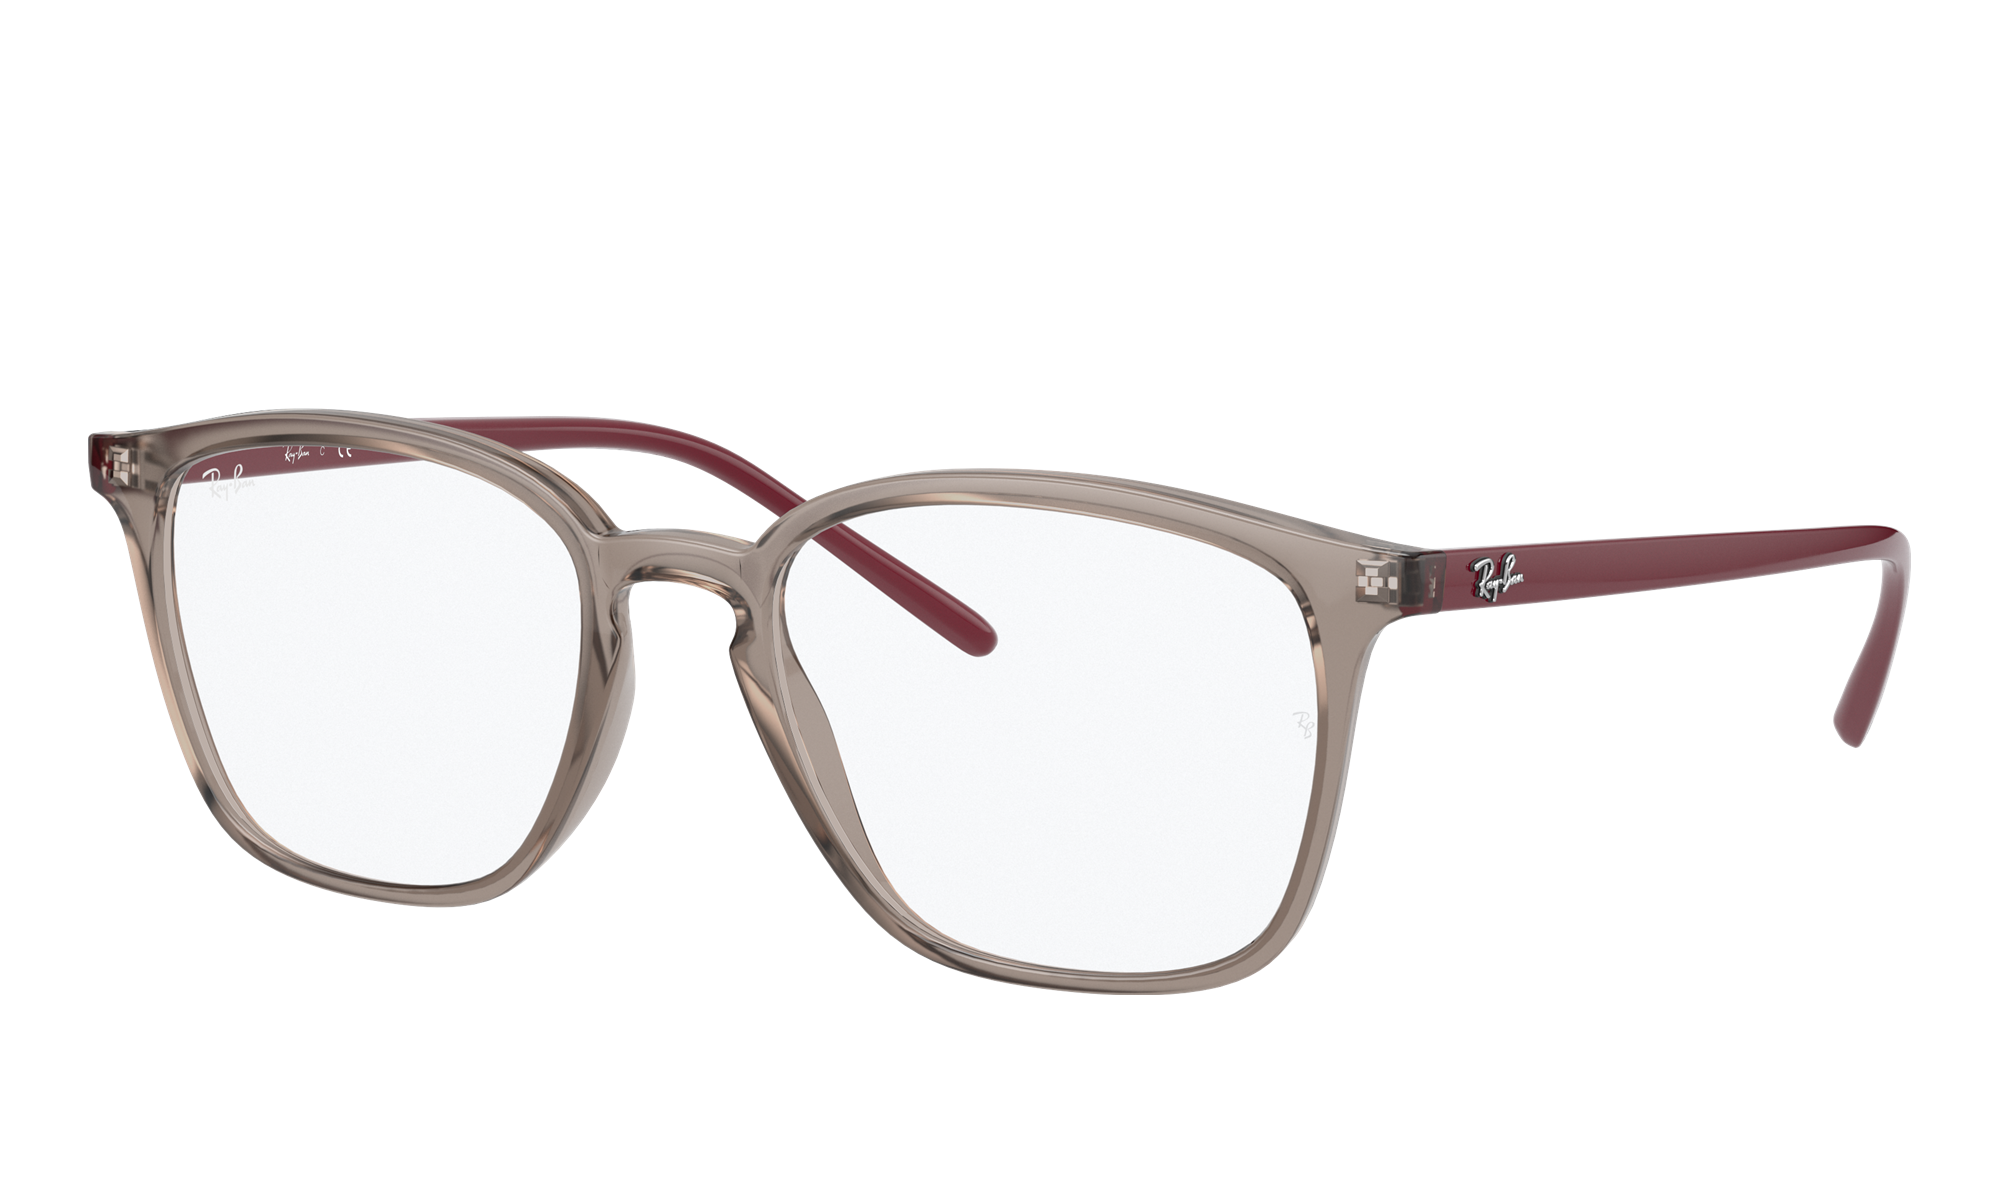 Ray-Ban Unisex Rx7185 Transparent Grey Size: Small